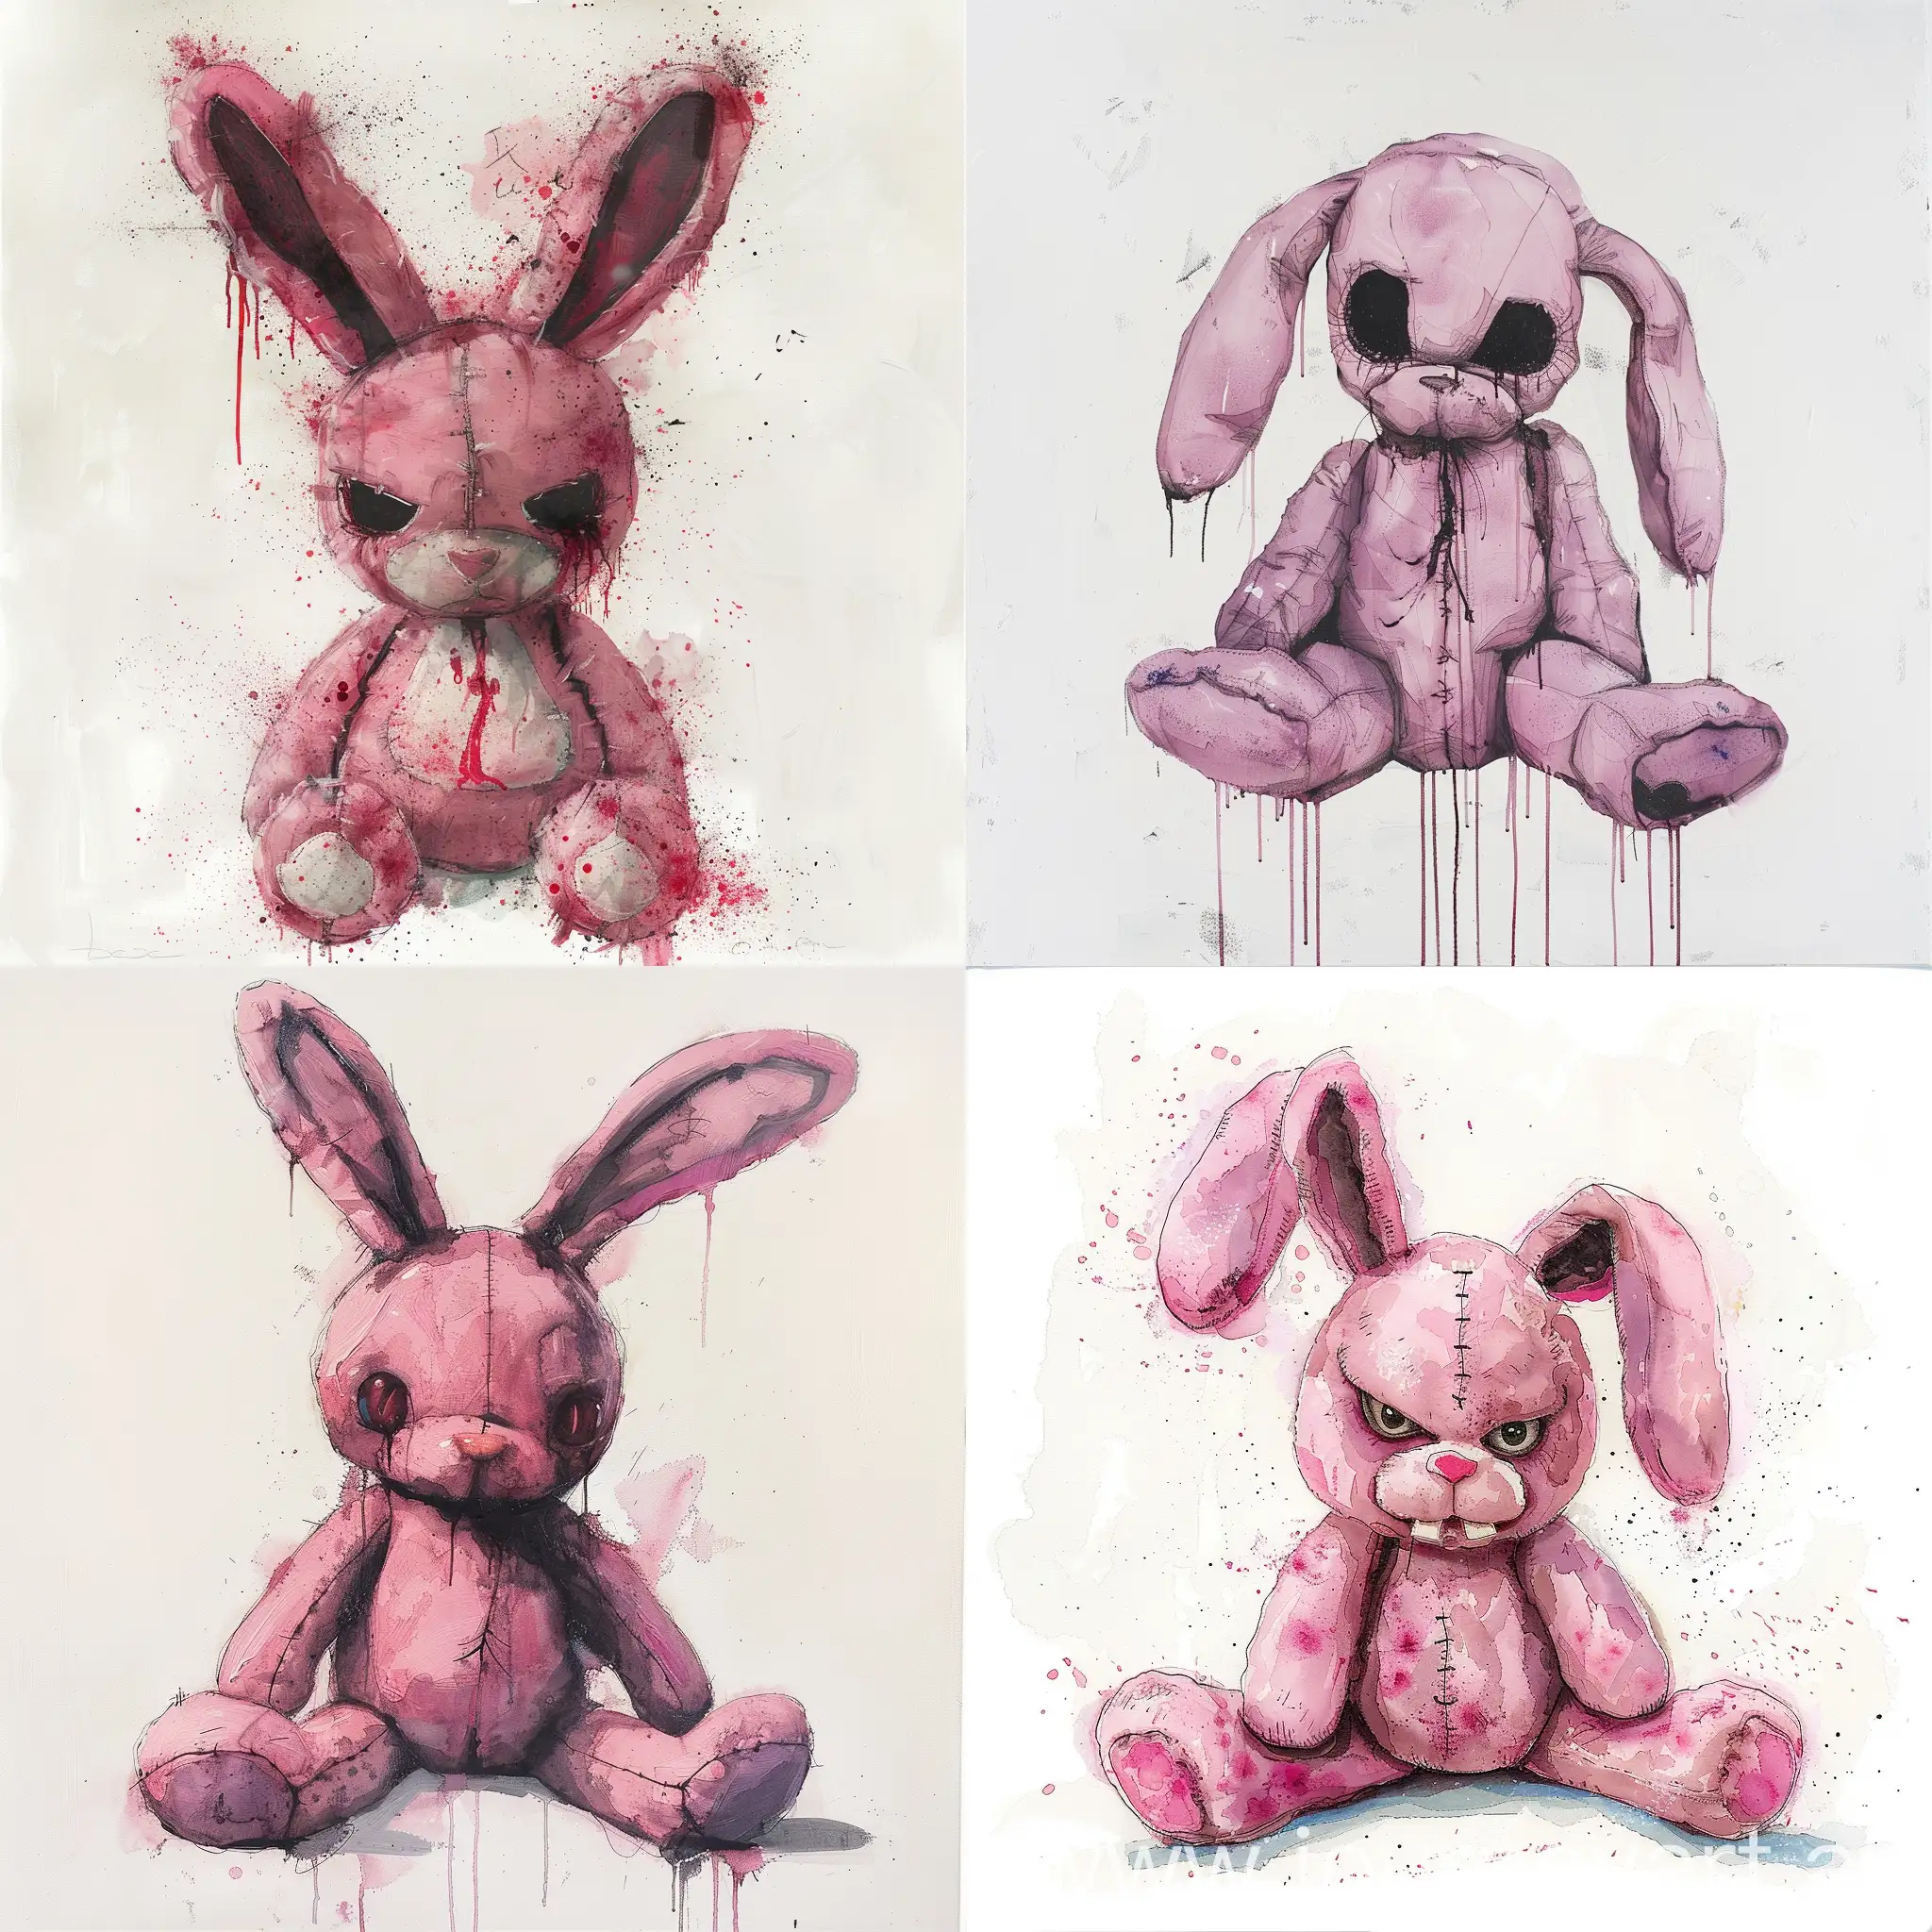 A postmodern water painting of an evil pink bunny plush doll on white background